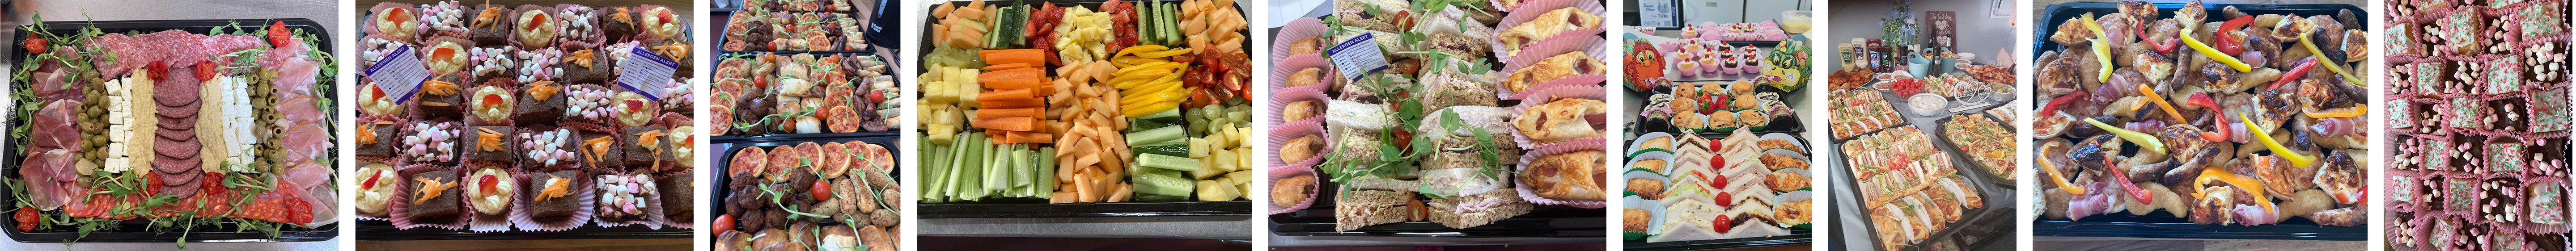 Mandys Pickles Buffet-Wakes-Outside Catering